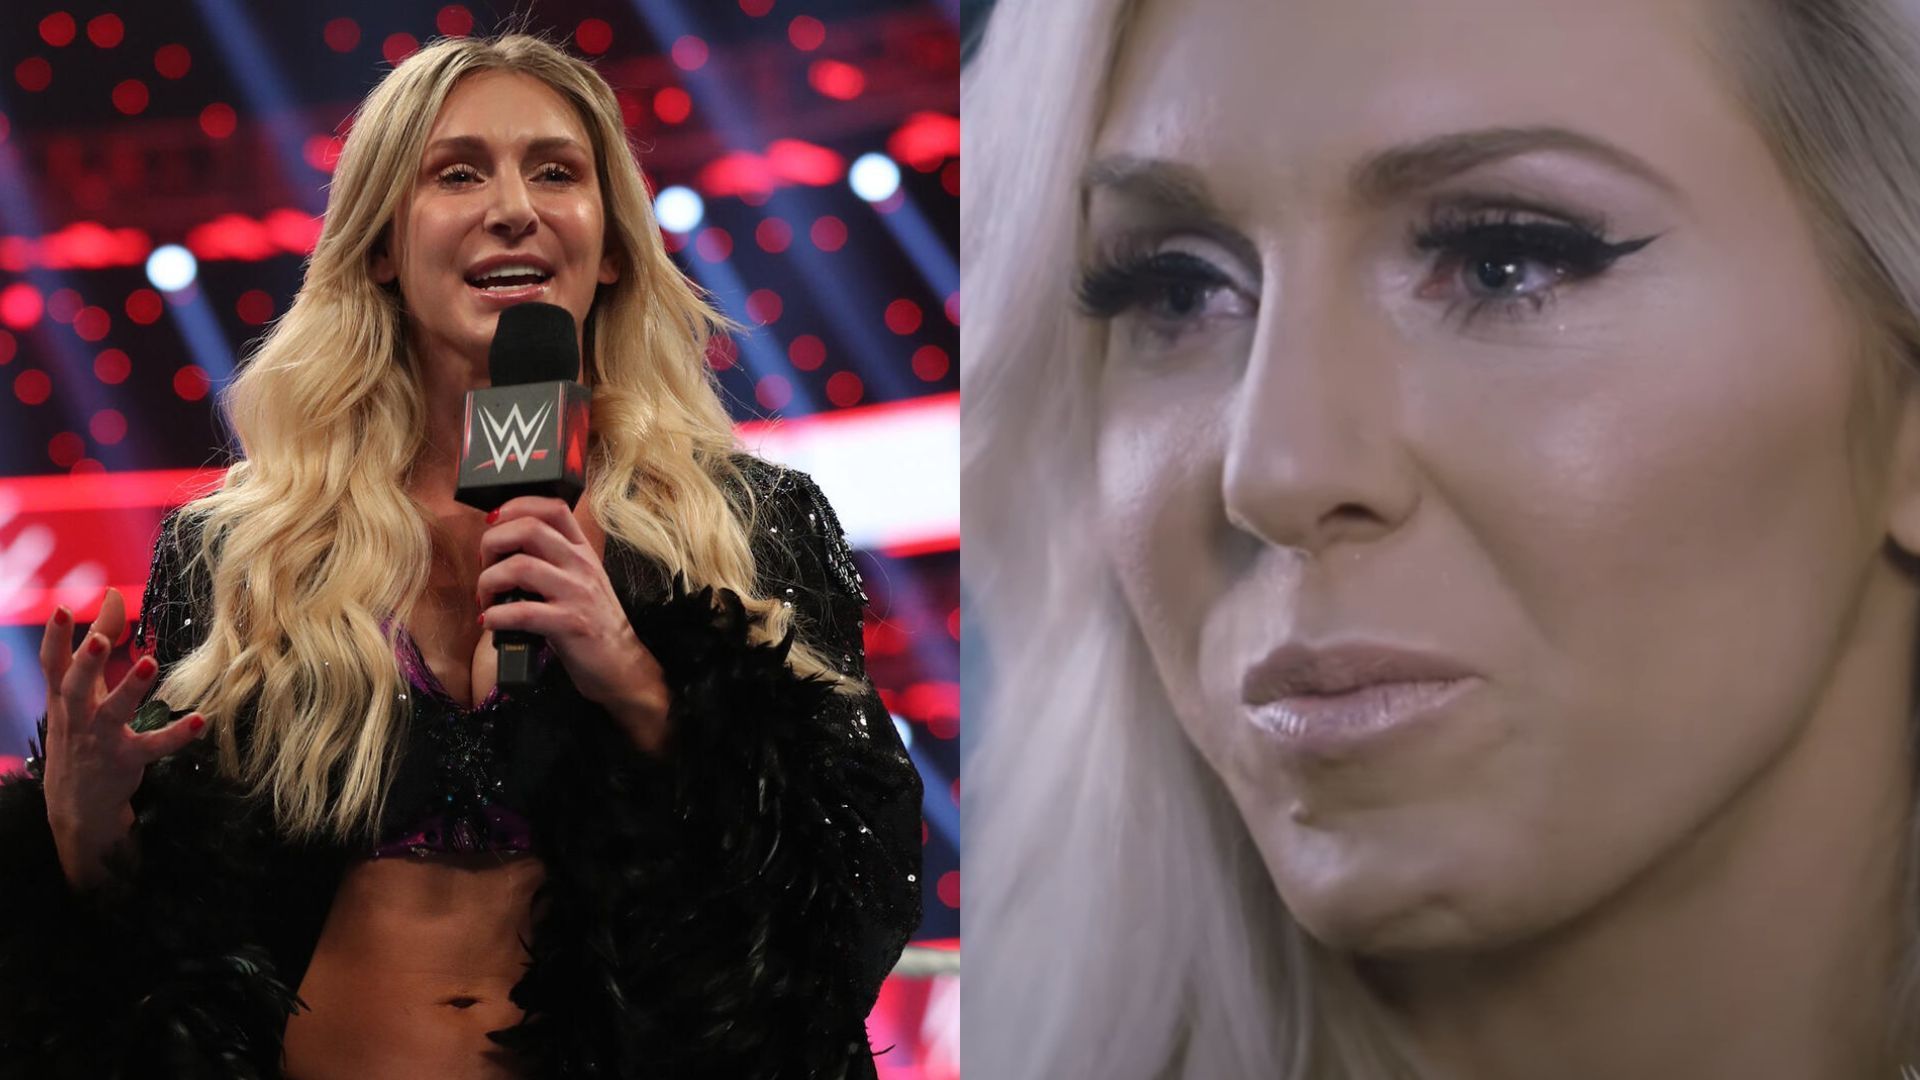 Charlotte Flair reacts to major announcement about her by WWE